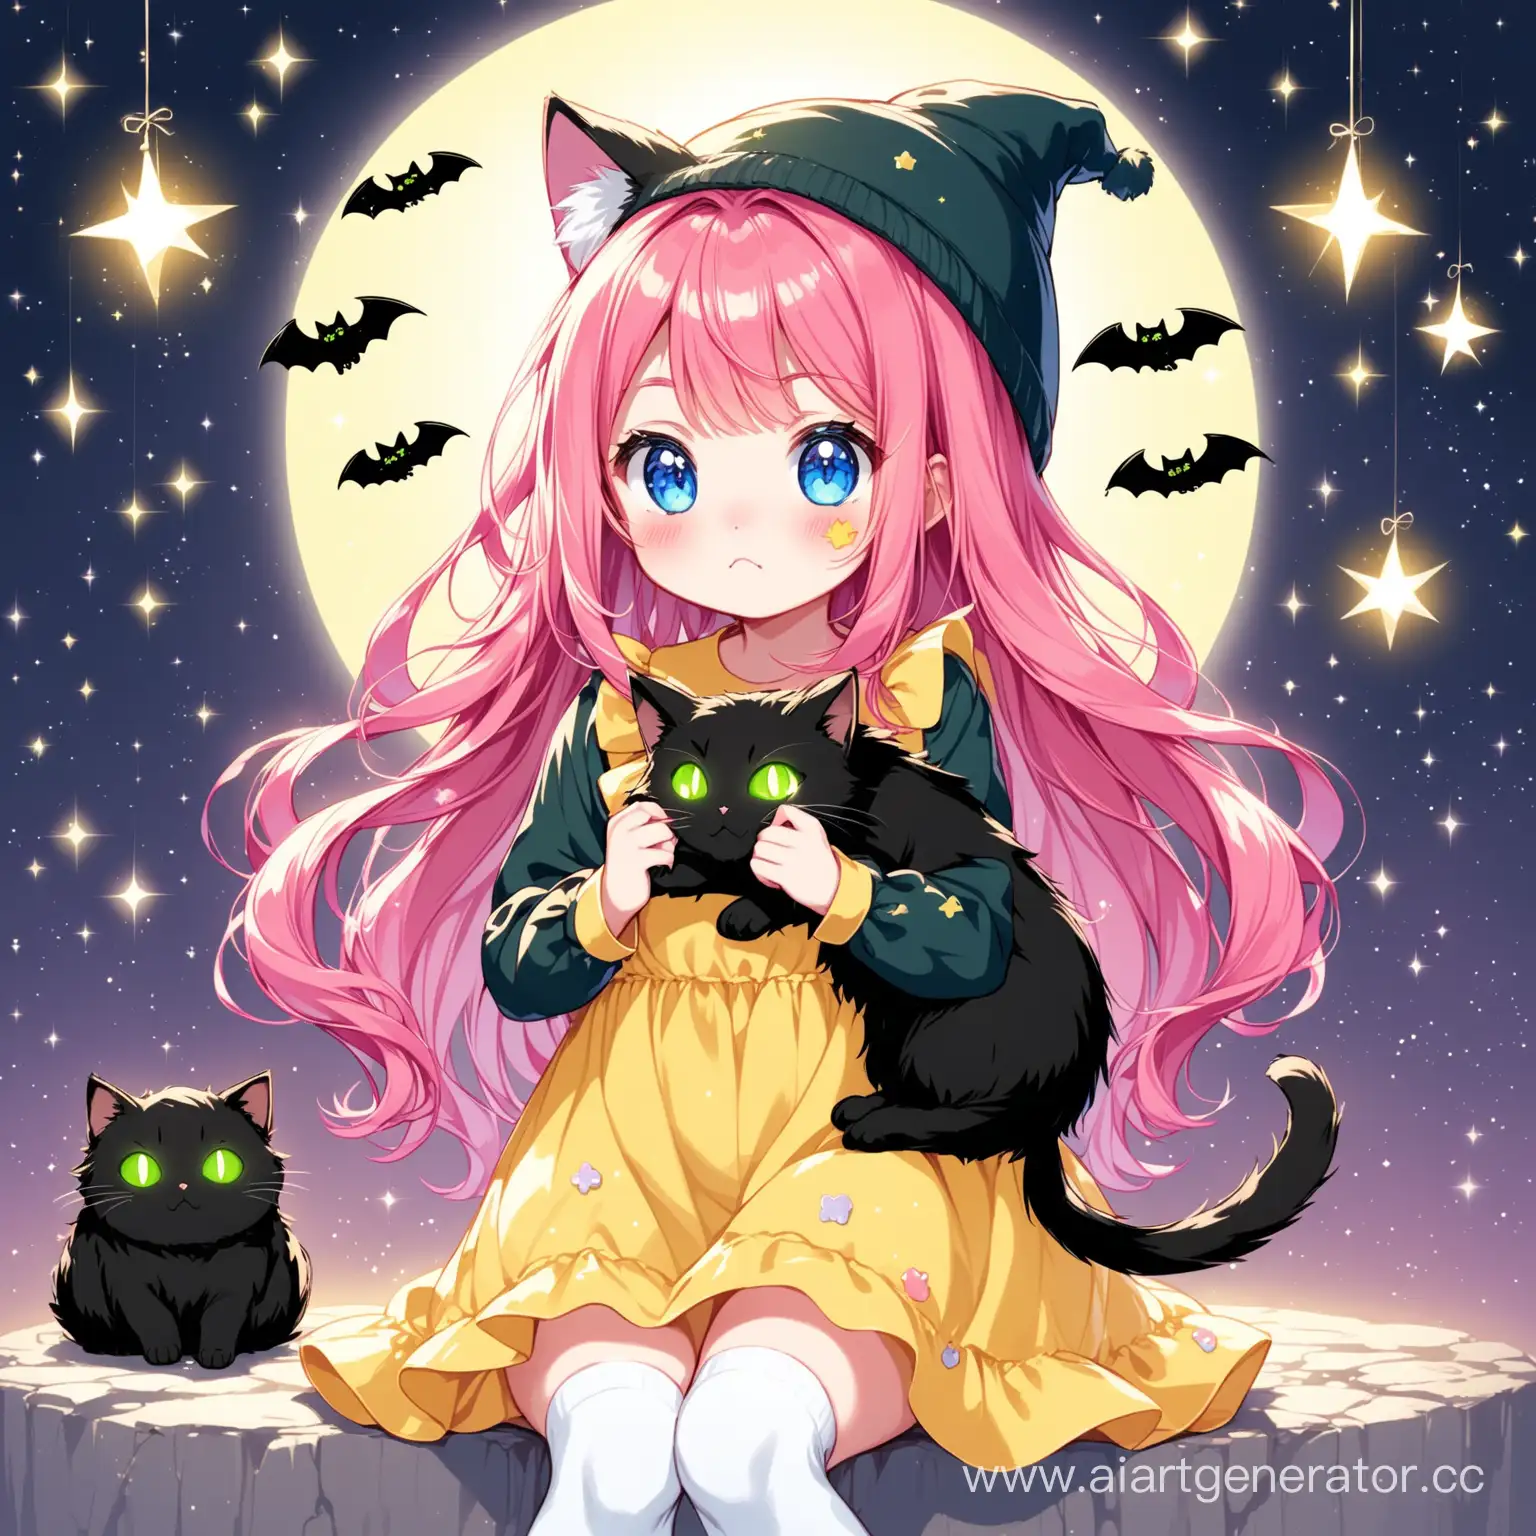 Whimsical-Girl-with-Pink-Wavy-Hair-Holding-Bat-and-Displeased-Black-Cat